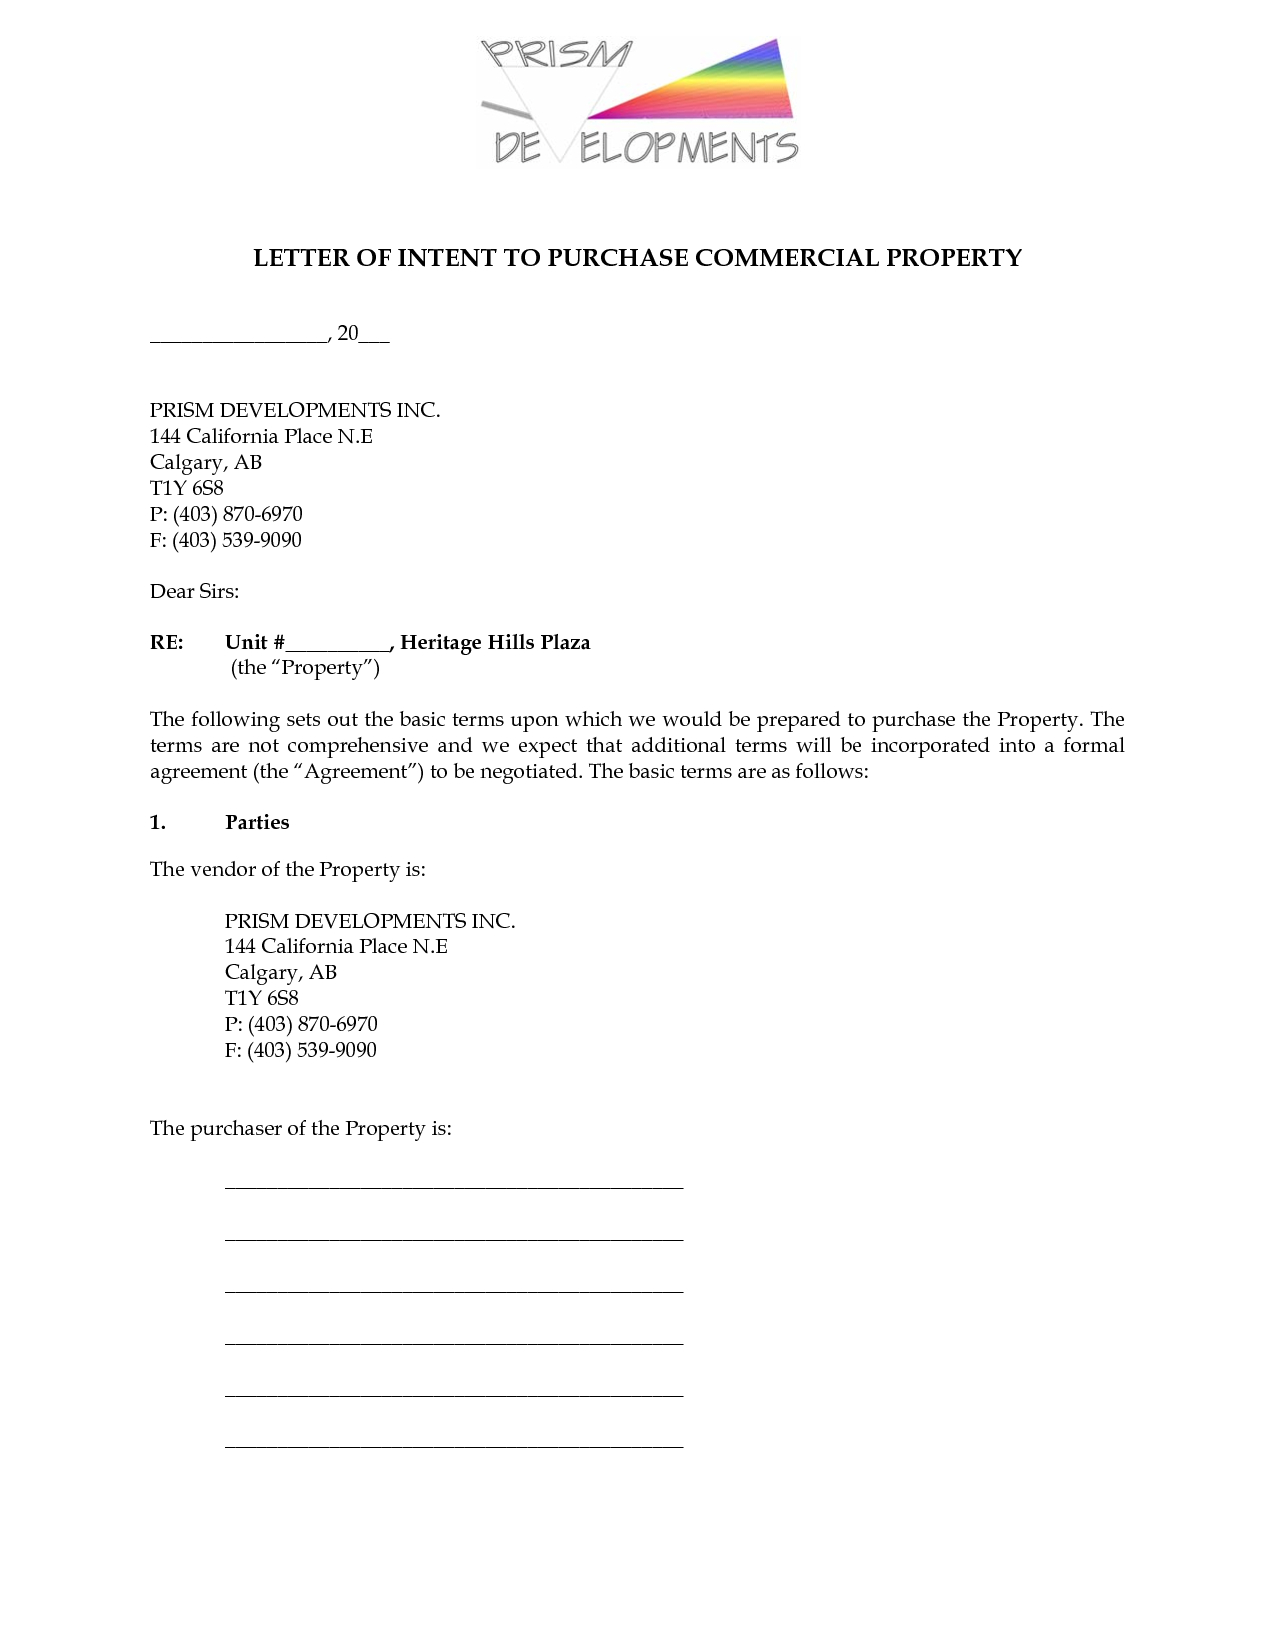 Letter Of Intent to Sell House Template - Simple Letter Intent to Purchaserty High Real Estate Free